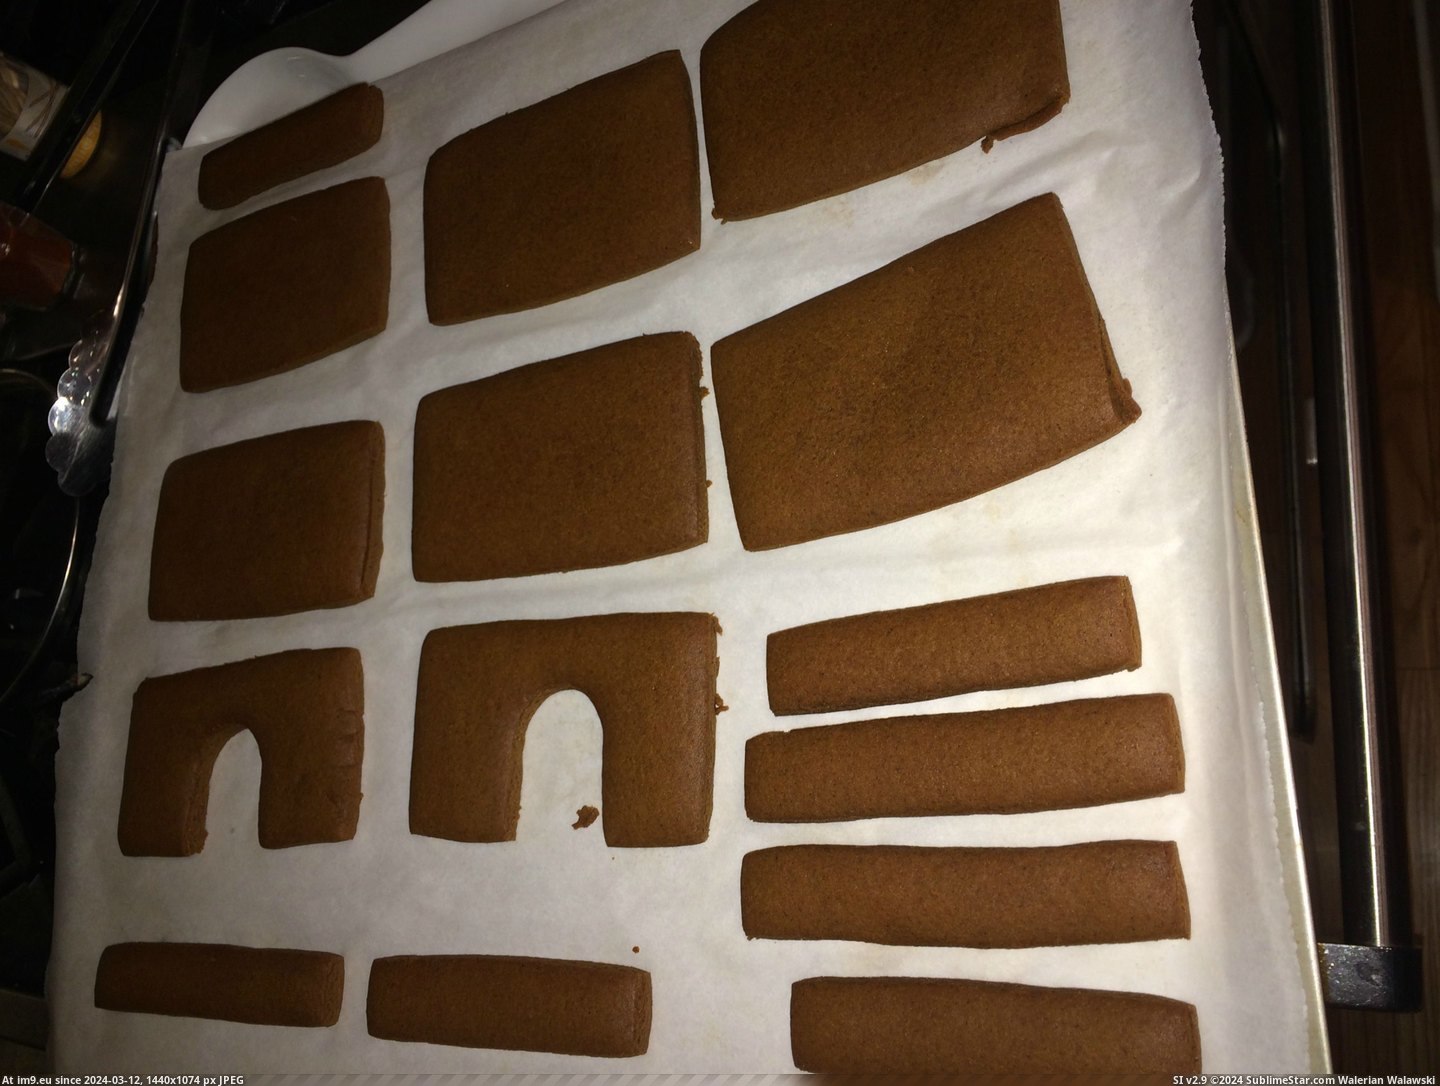 #Husband #Get #Our #Divorced #Collaborated #Project #Gingerbread #Success [Pics] My husband and I collaborated on our first gingerbread project and didn't get divorced...success! 8 Pic. (Image of album My r/PICS favs))